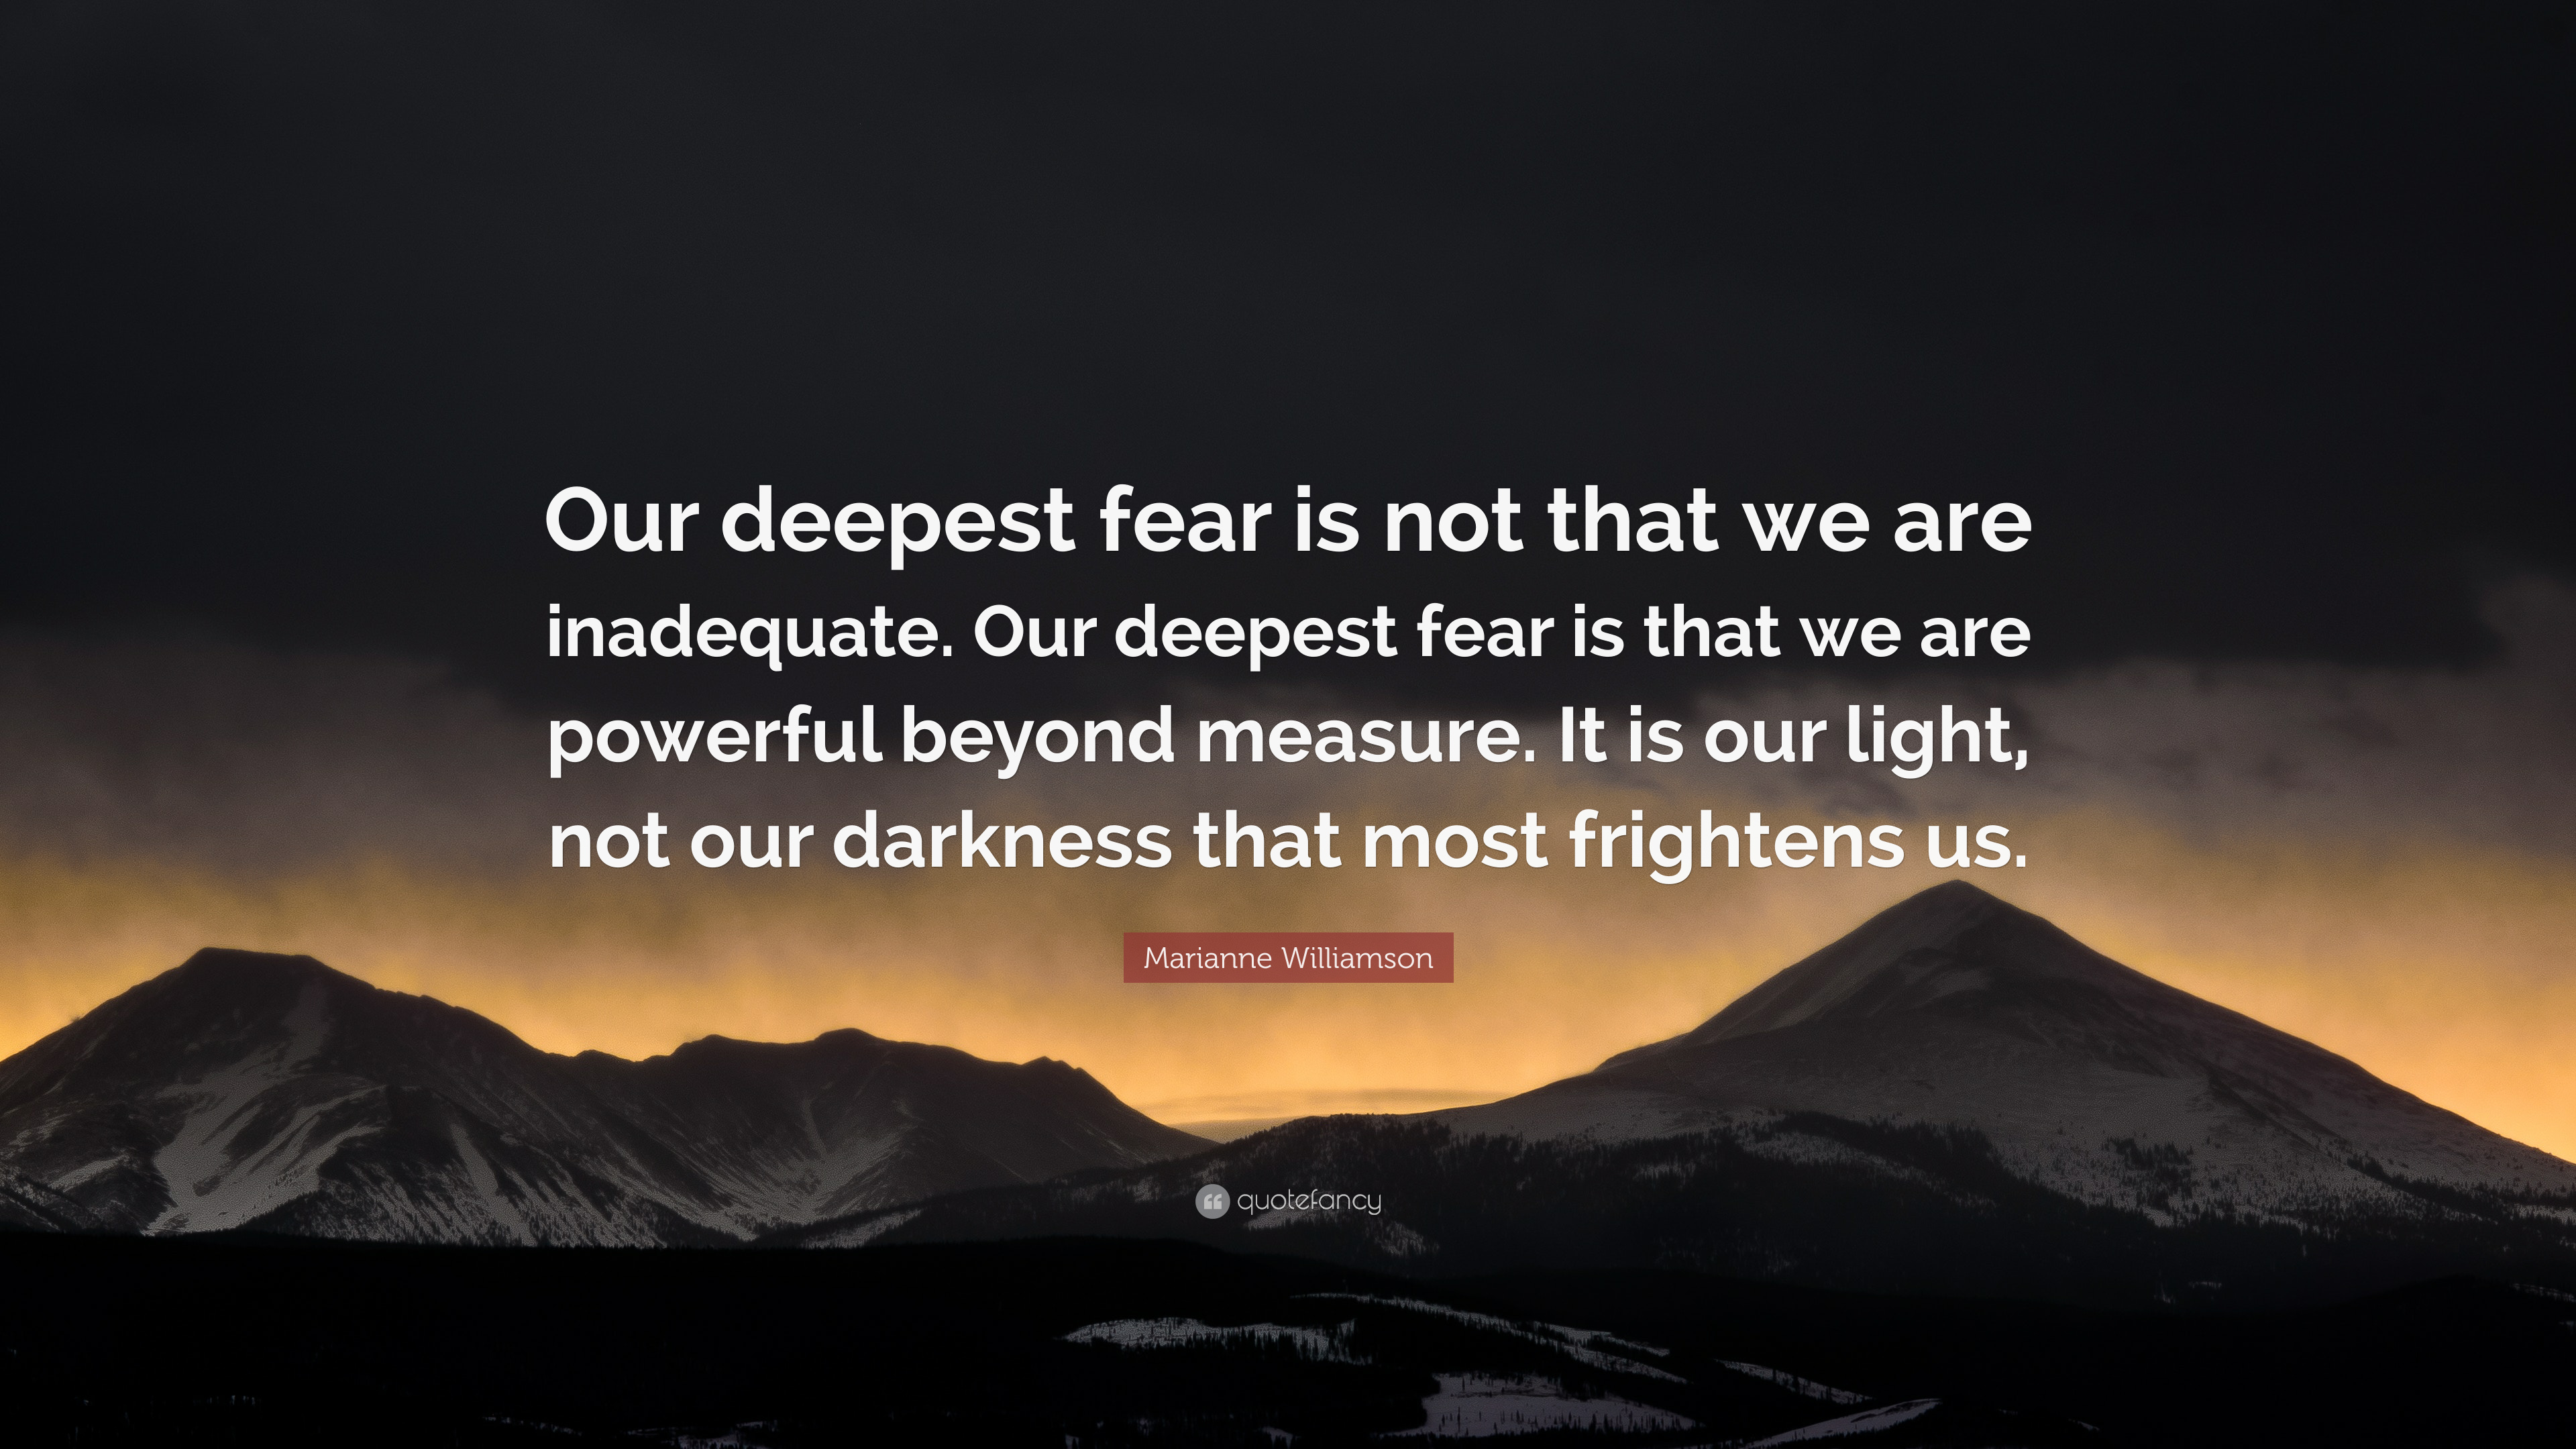 Our deepest fear